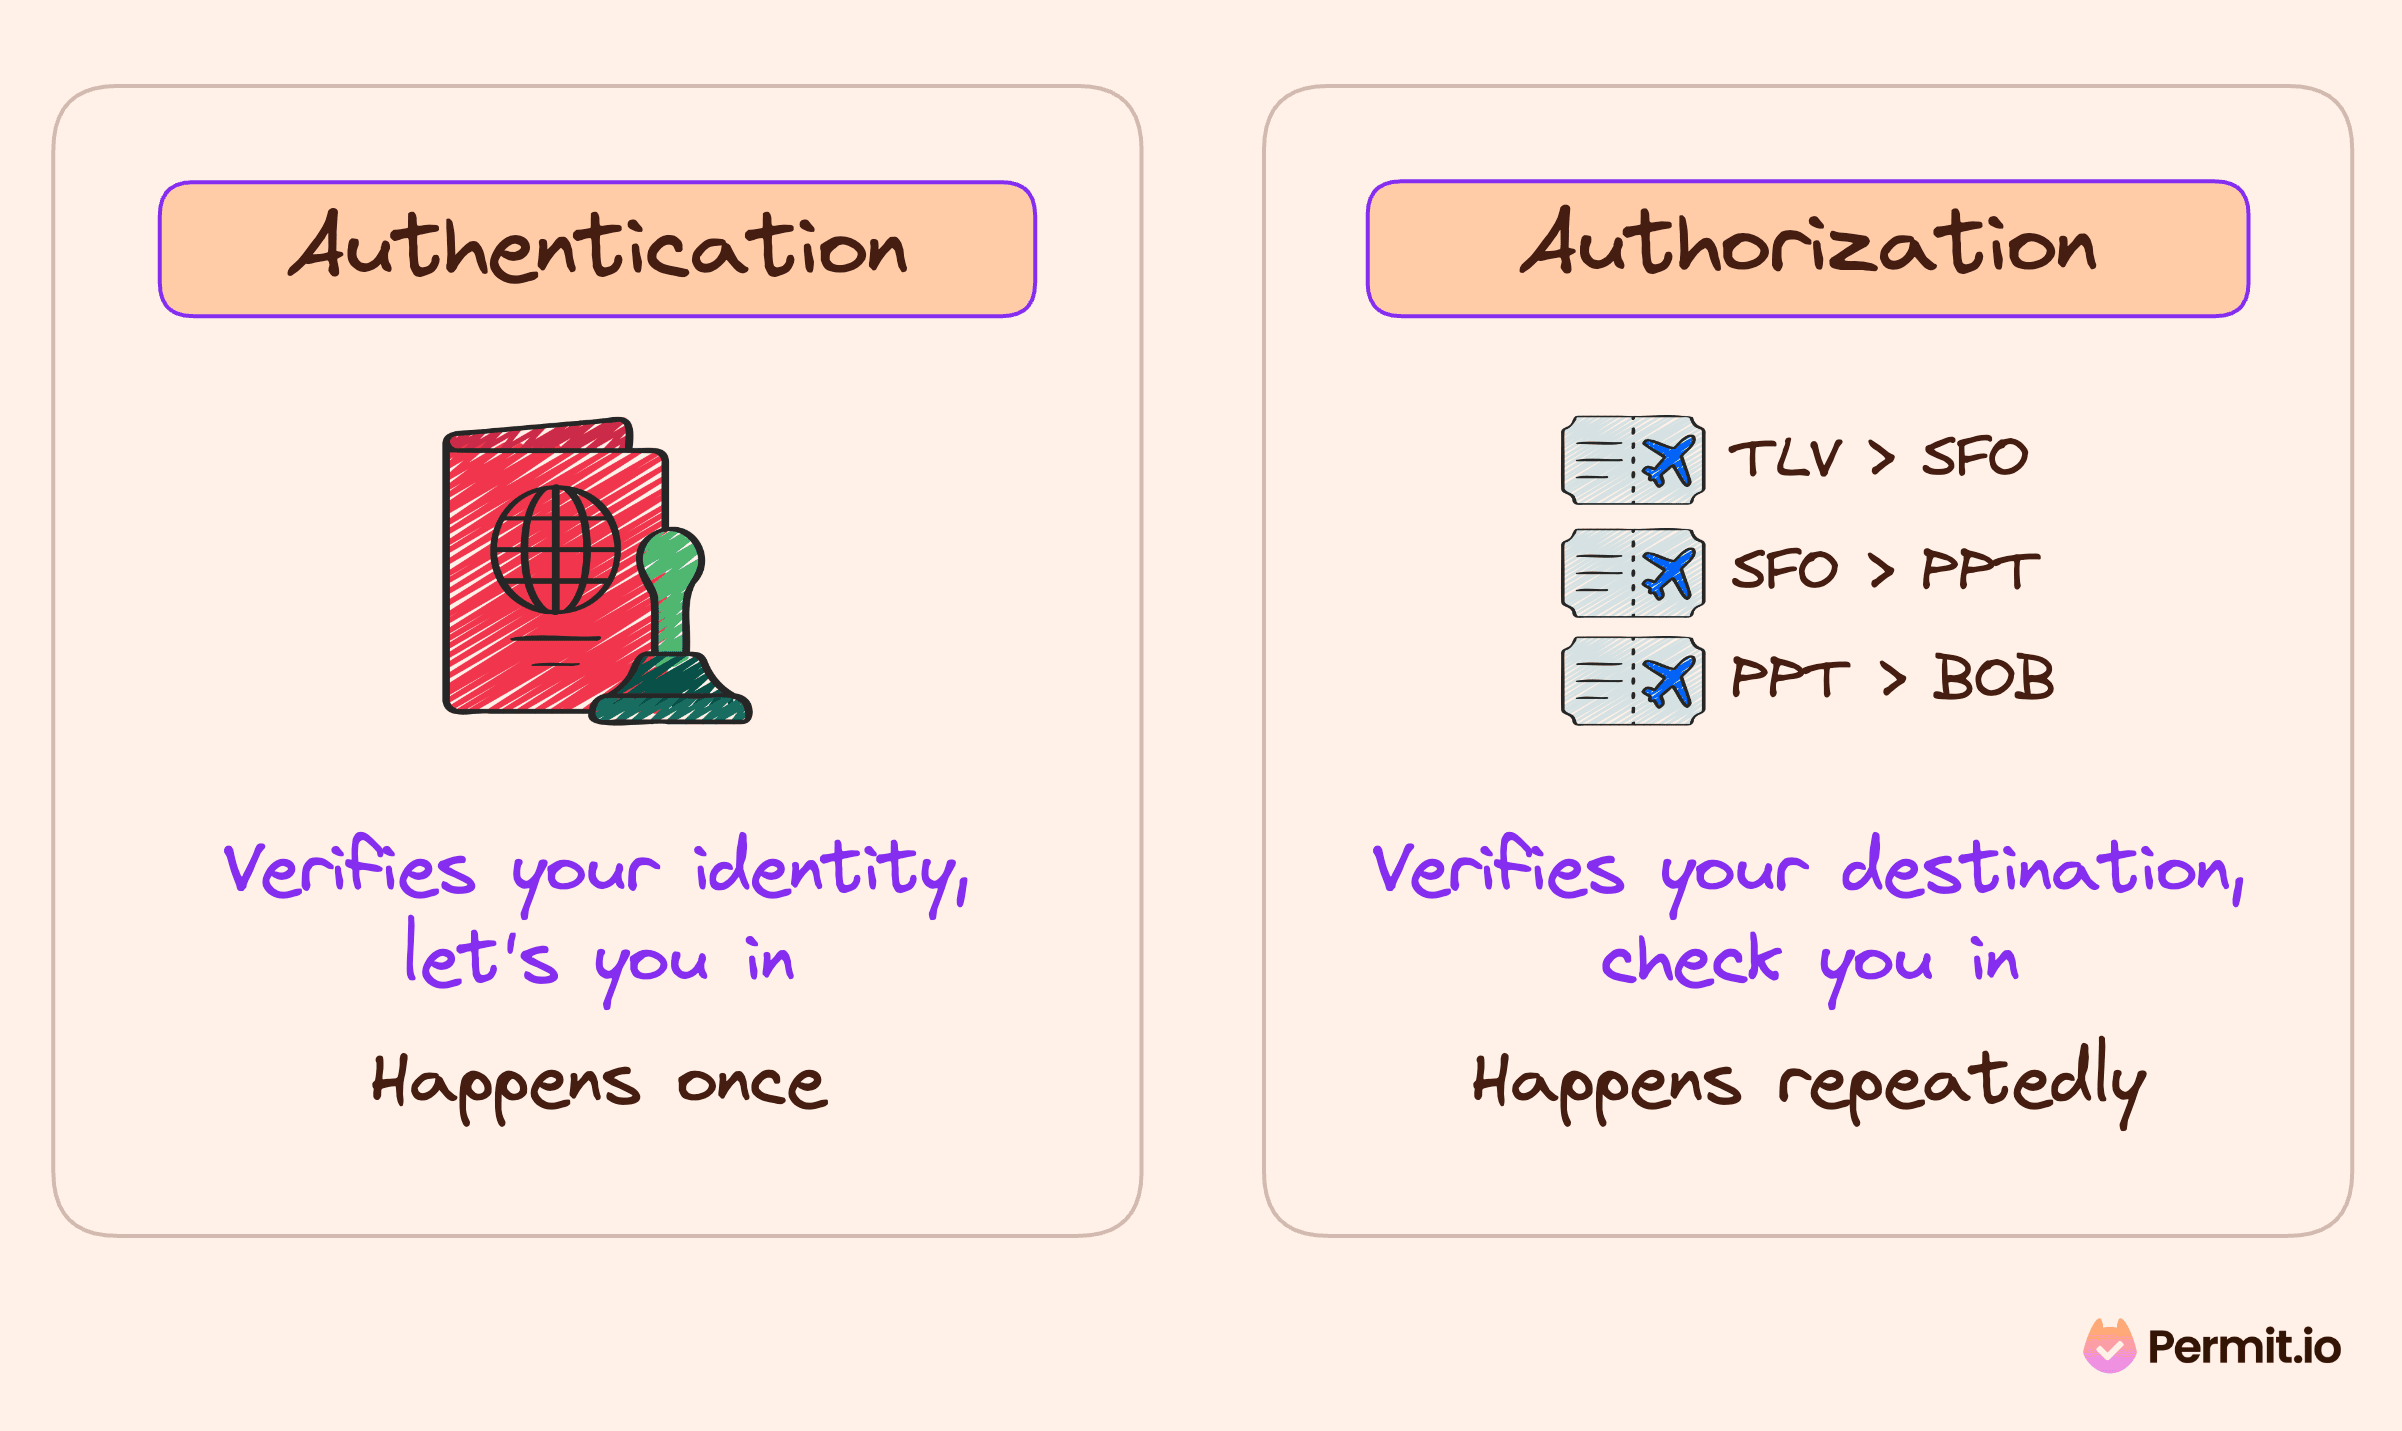 Authentication and Authorization differences diagram